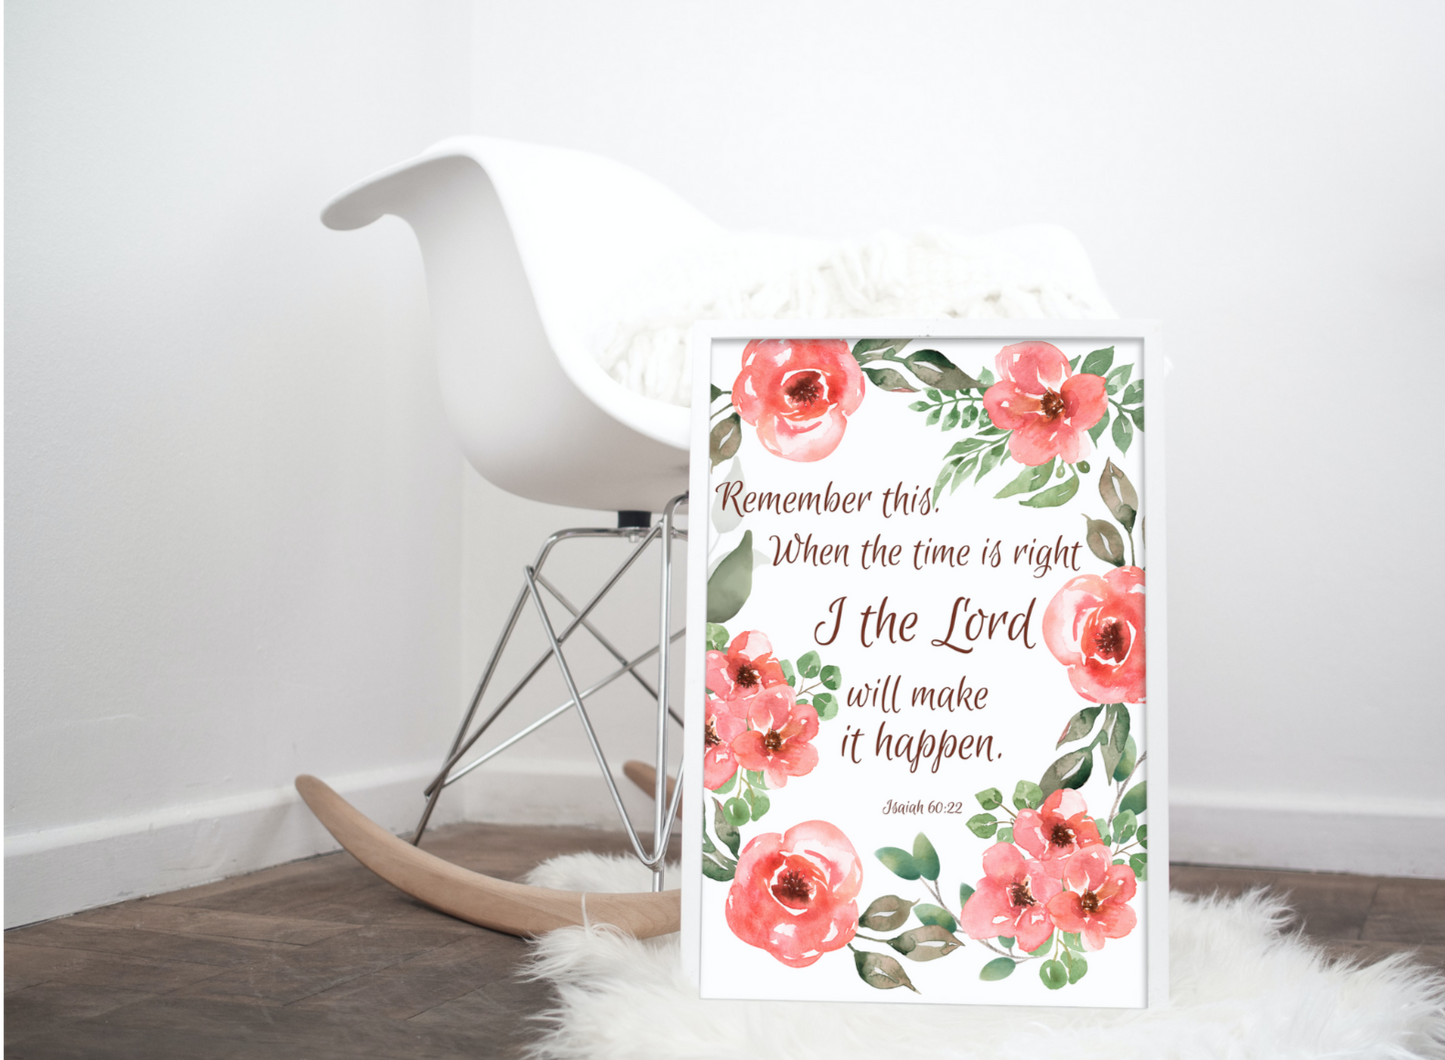 When the Time is right, I the Lord will Make it Happen Physical Print - Catholic Wall Art